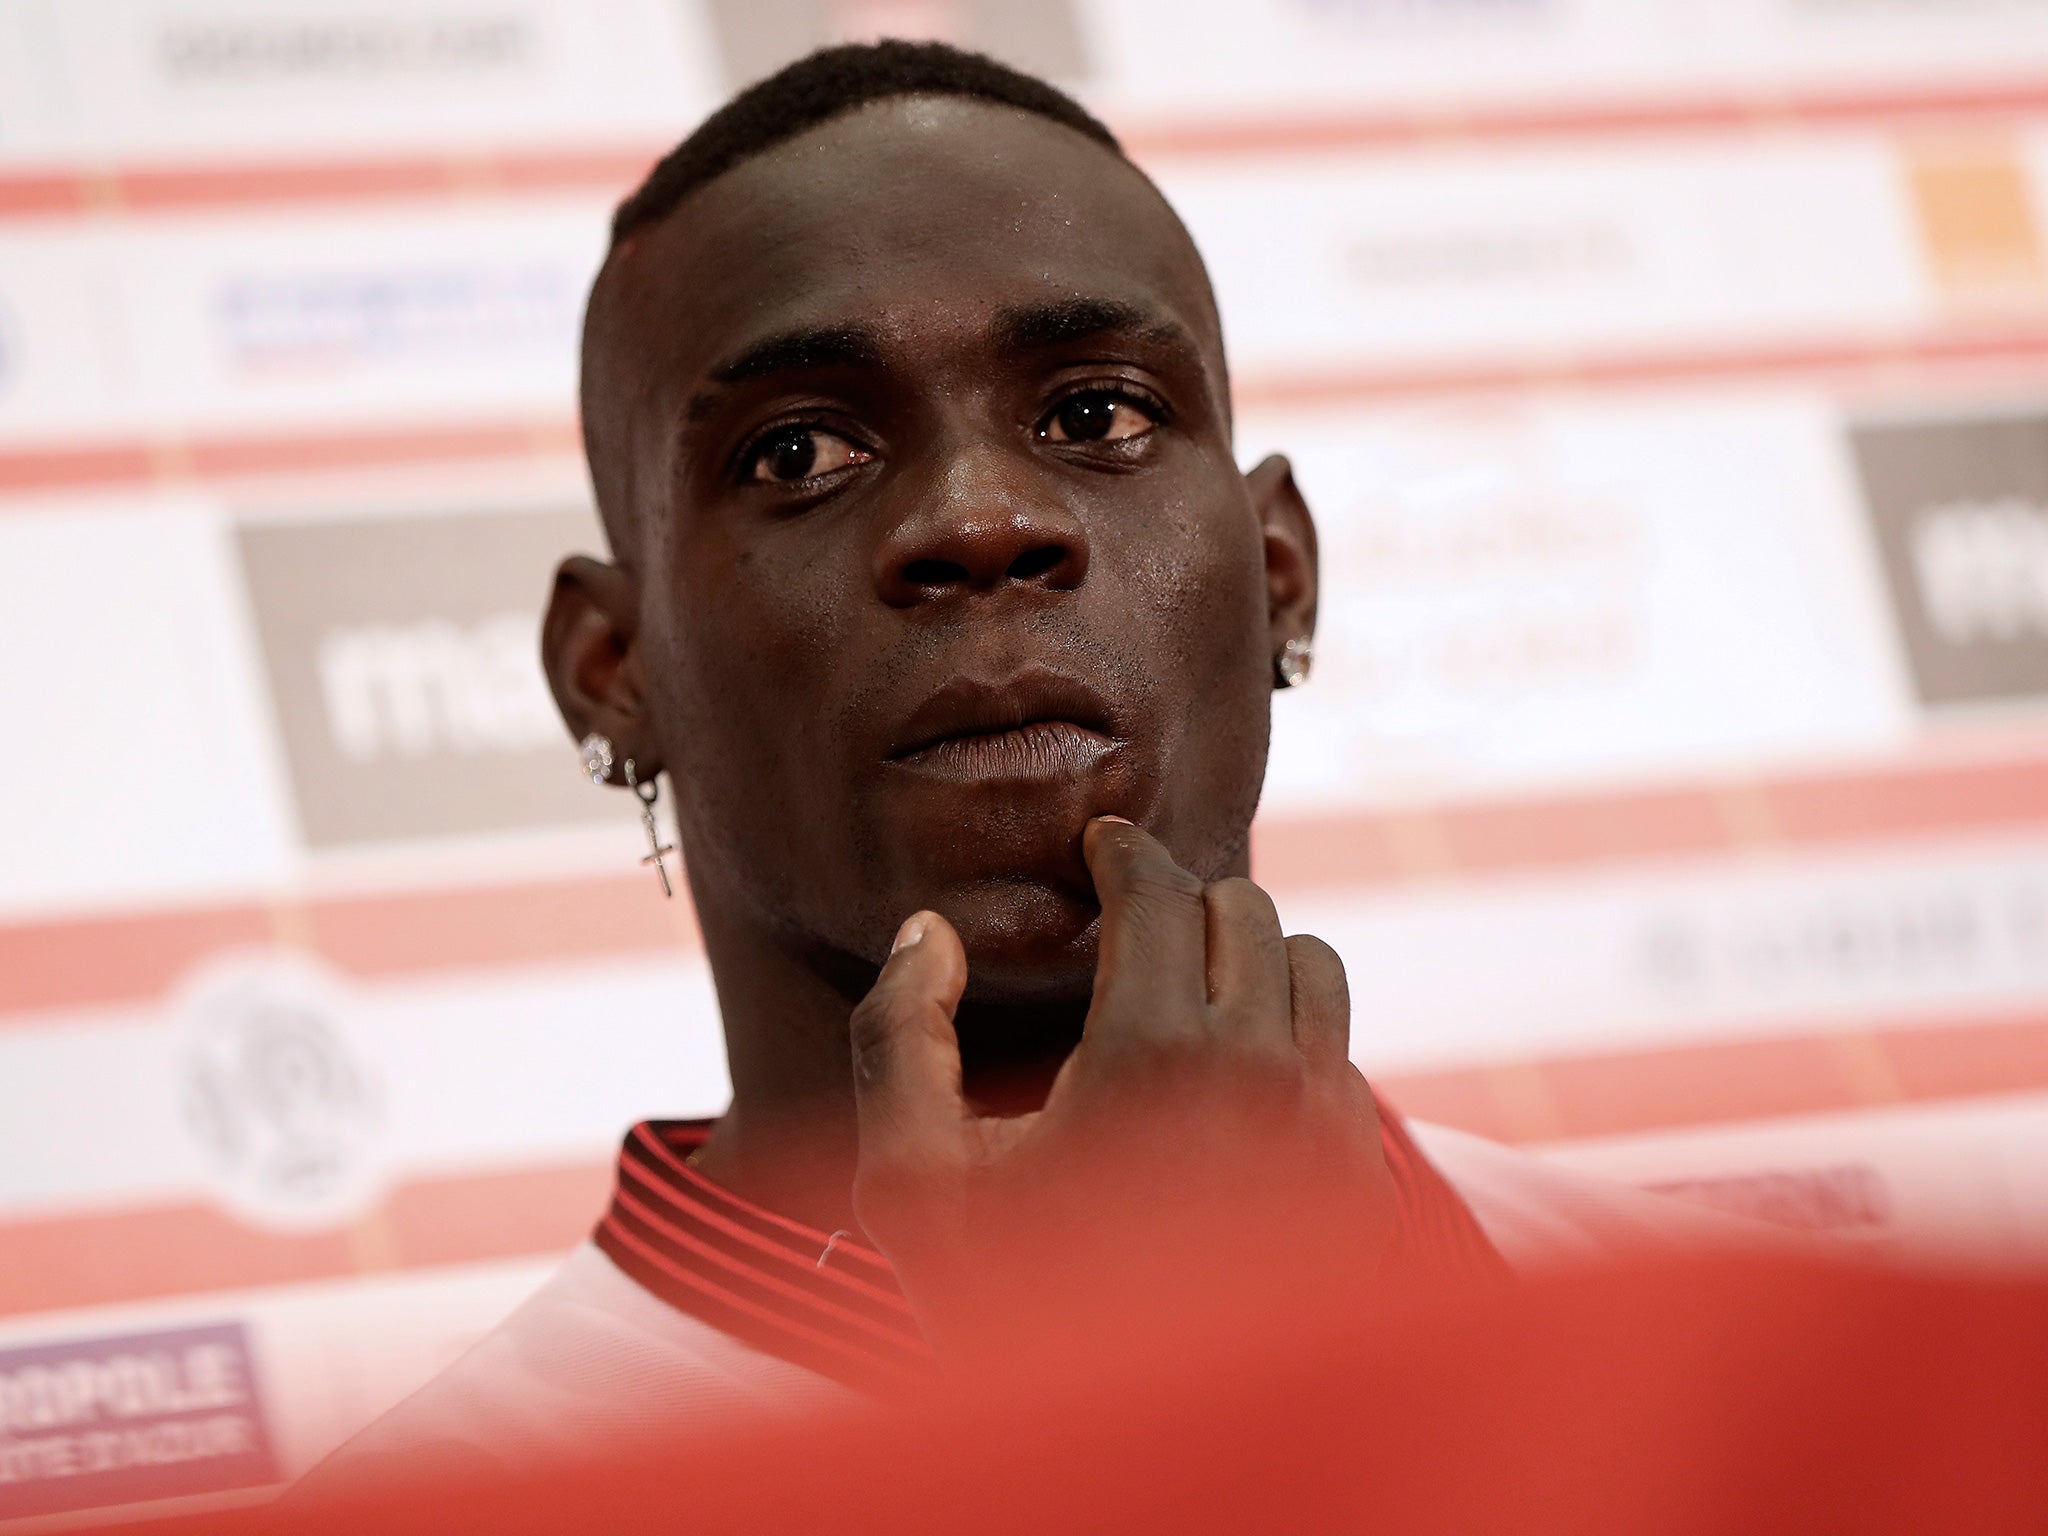 Balotelli could not be helped despite Liverpool's best efforts